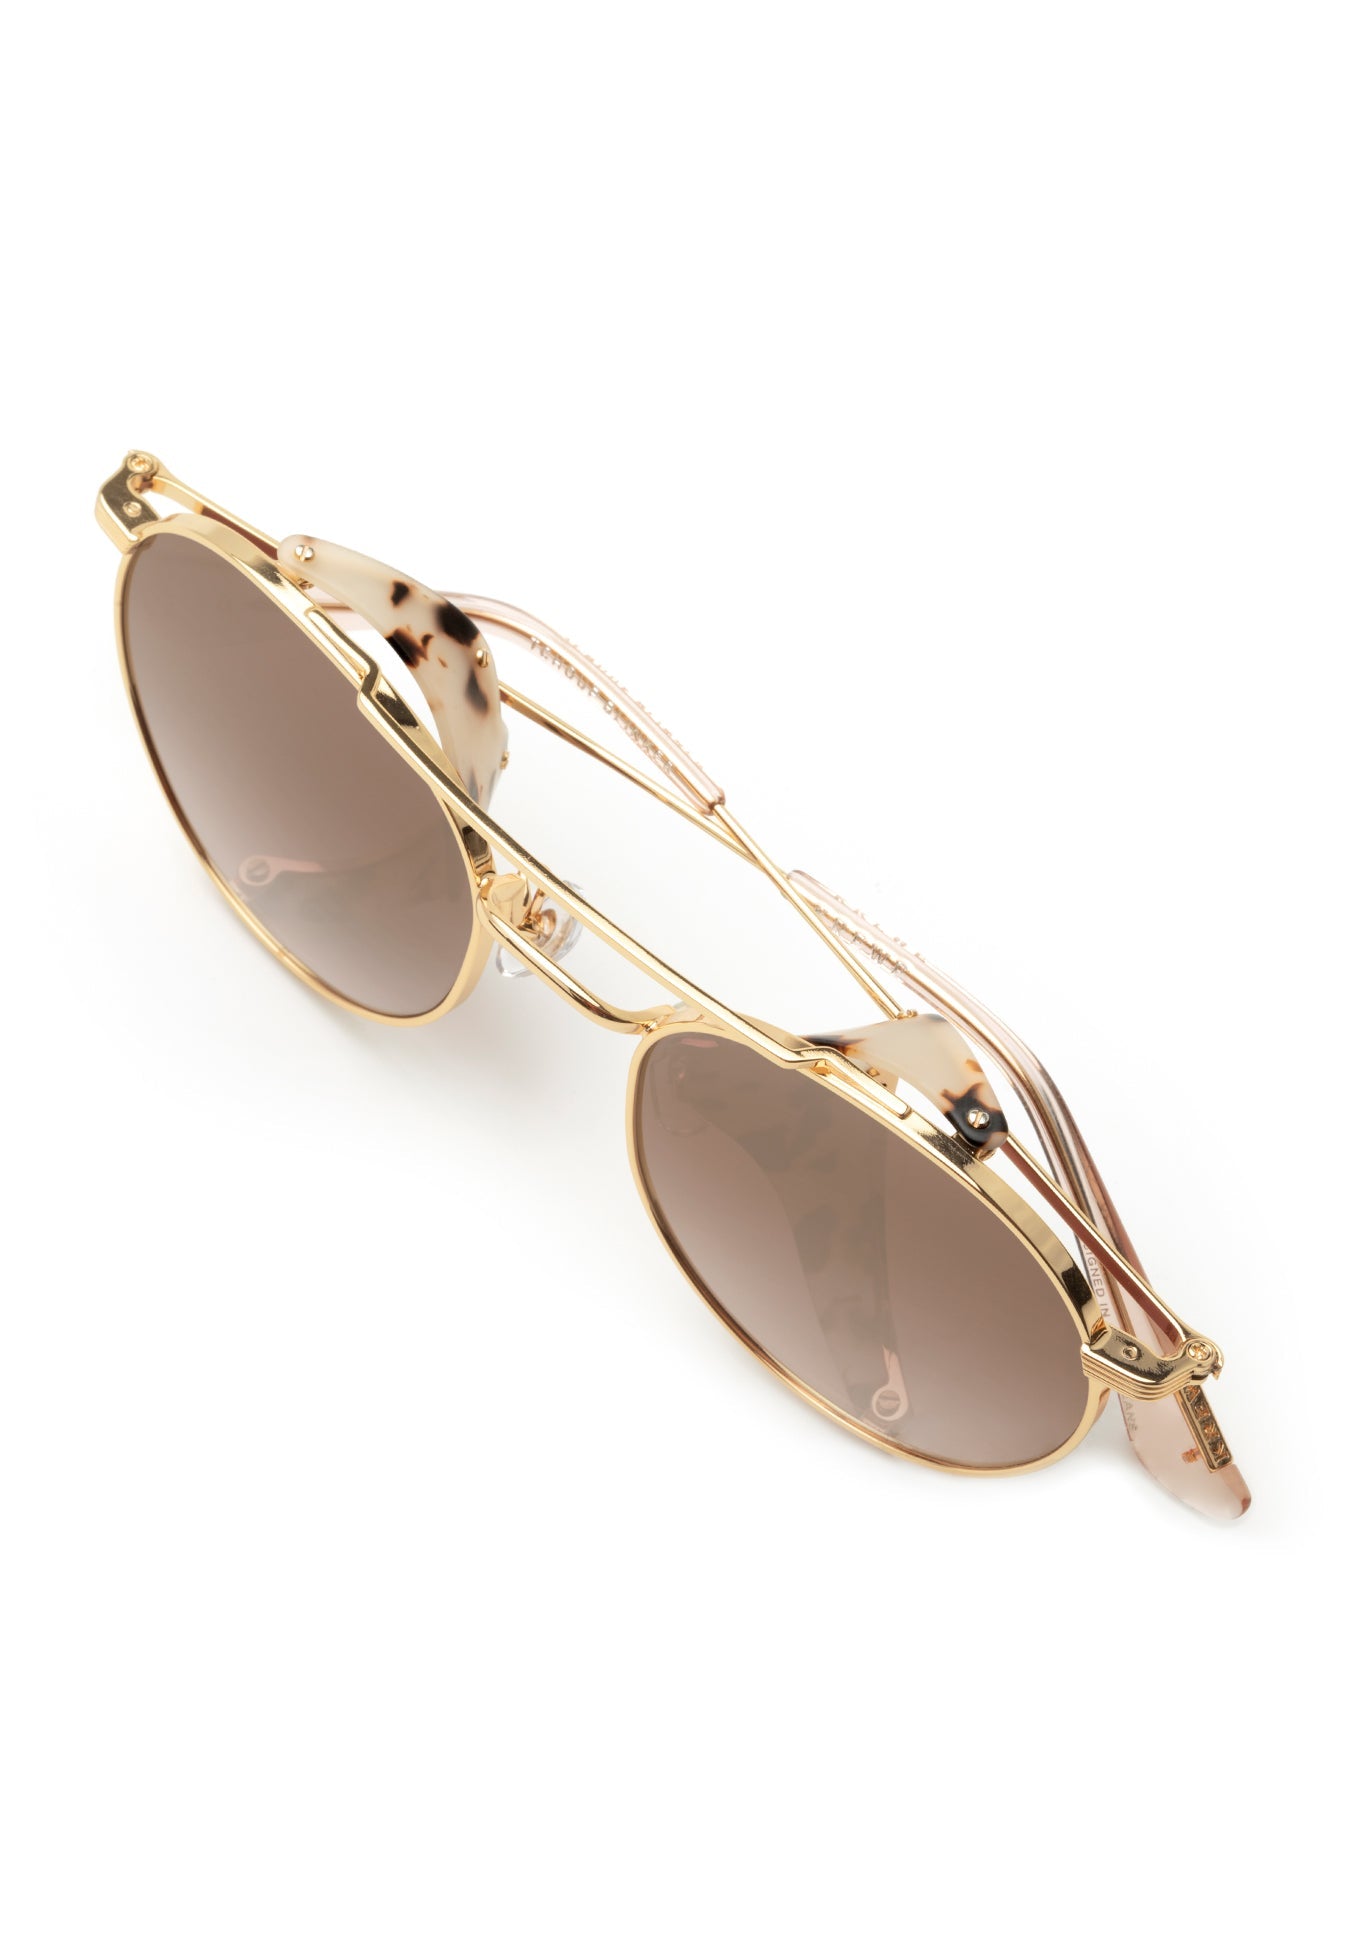 TCHOUP BLINKER | 24K + Matte Oyster Mirrored Handcrafted, luxury tortoise shell acetate with stainless steel